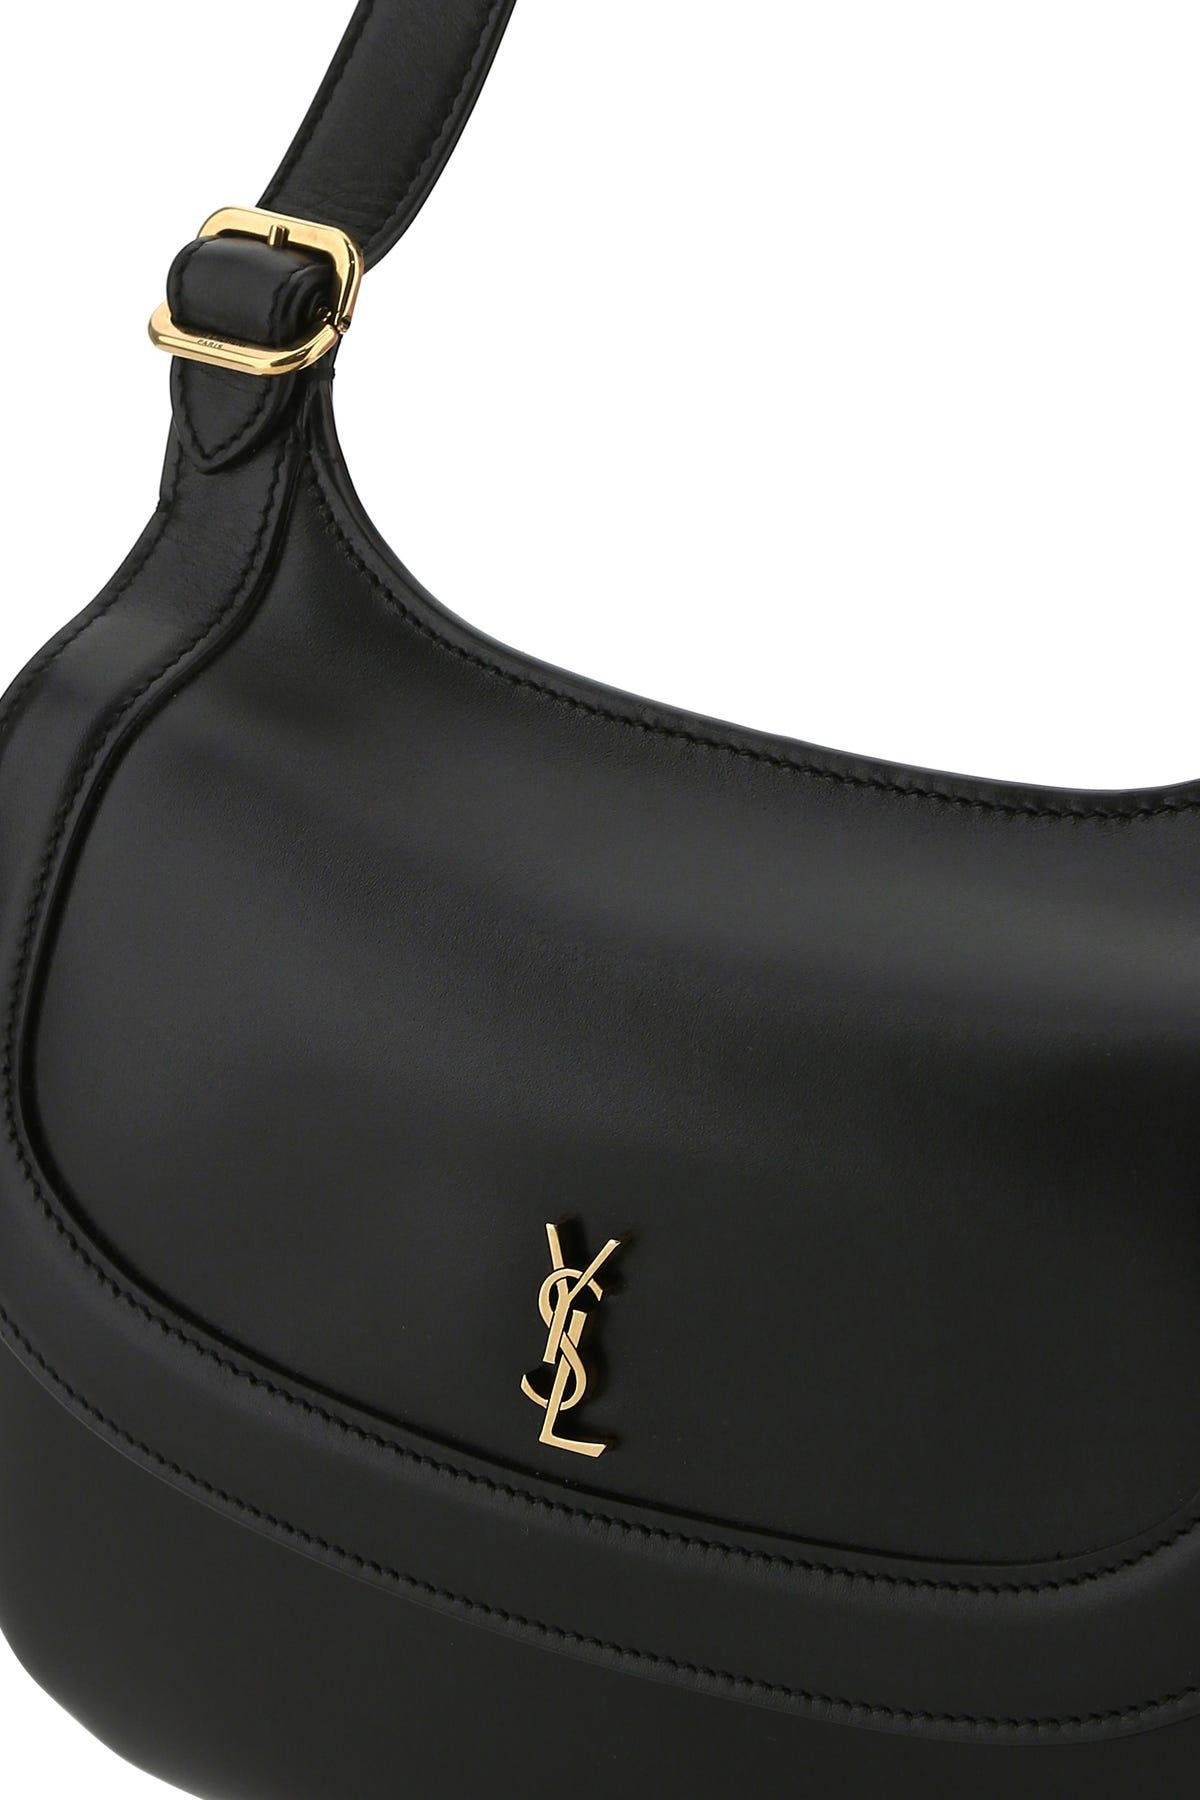 Crossbody ysl bag – what are the good-looking styles?